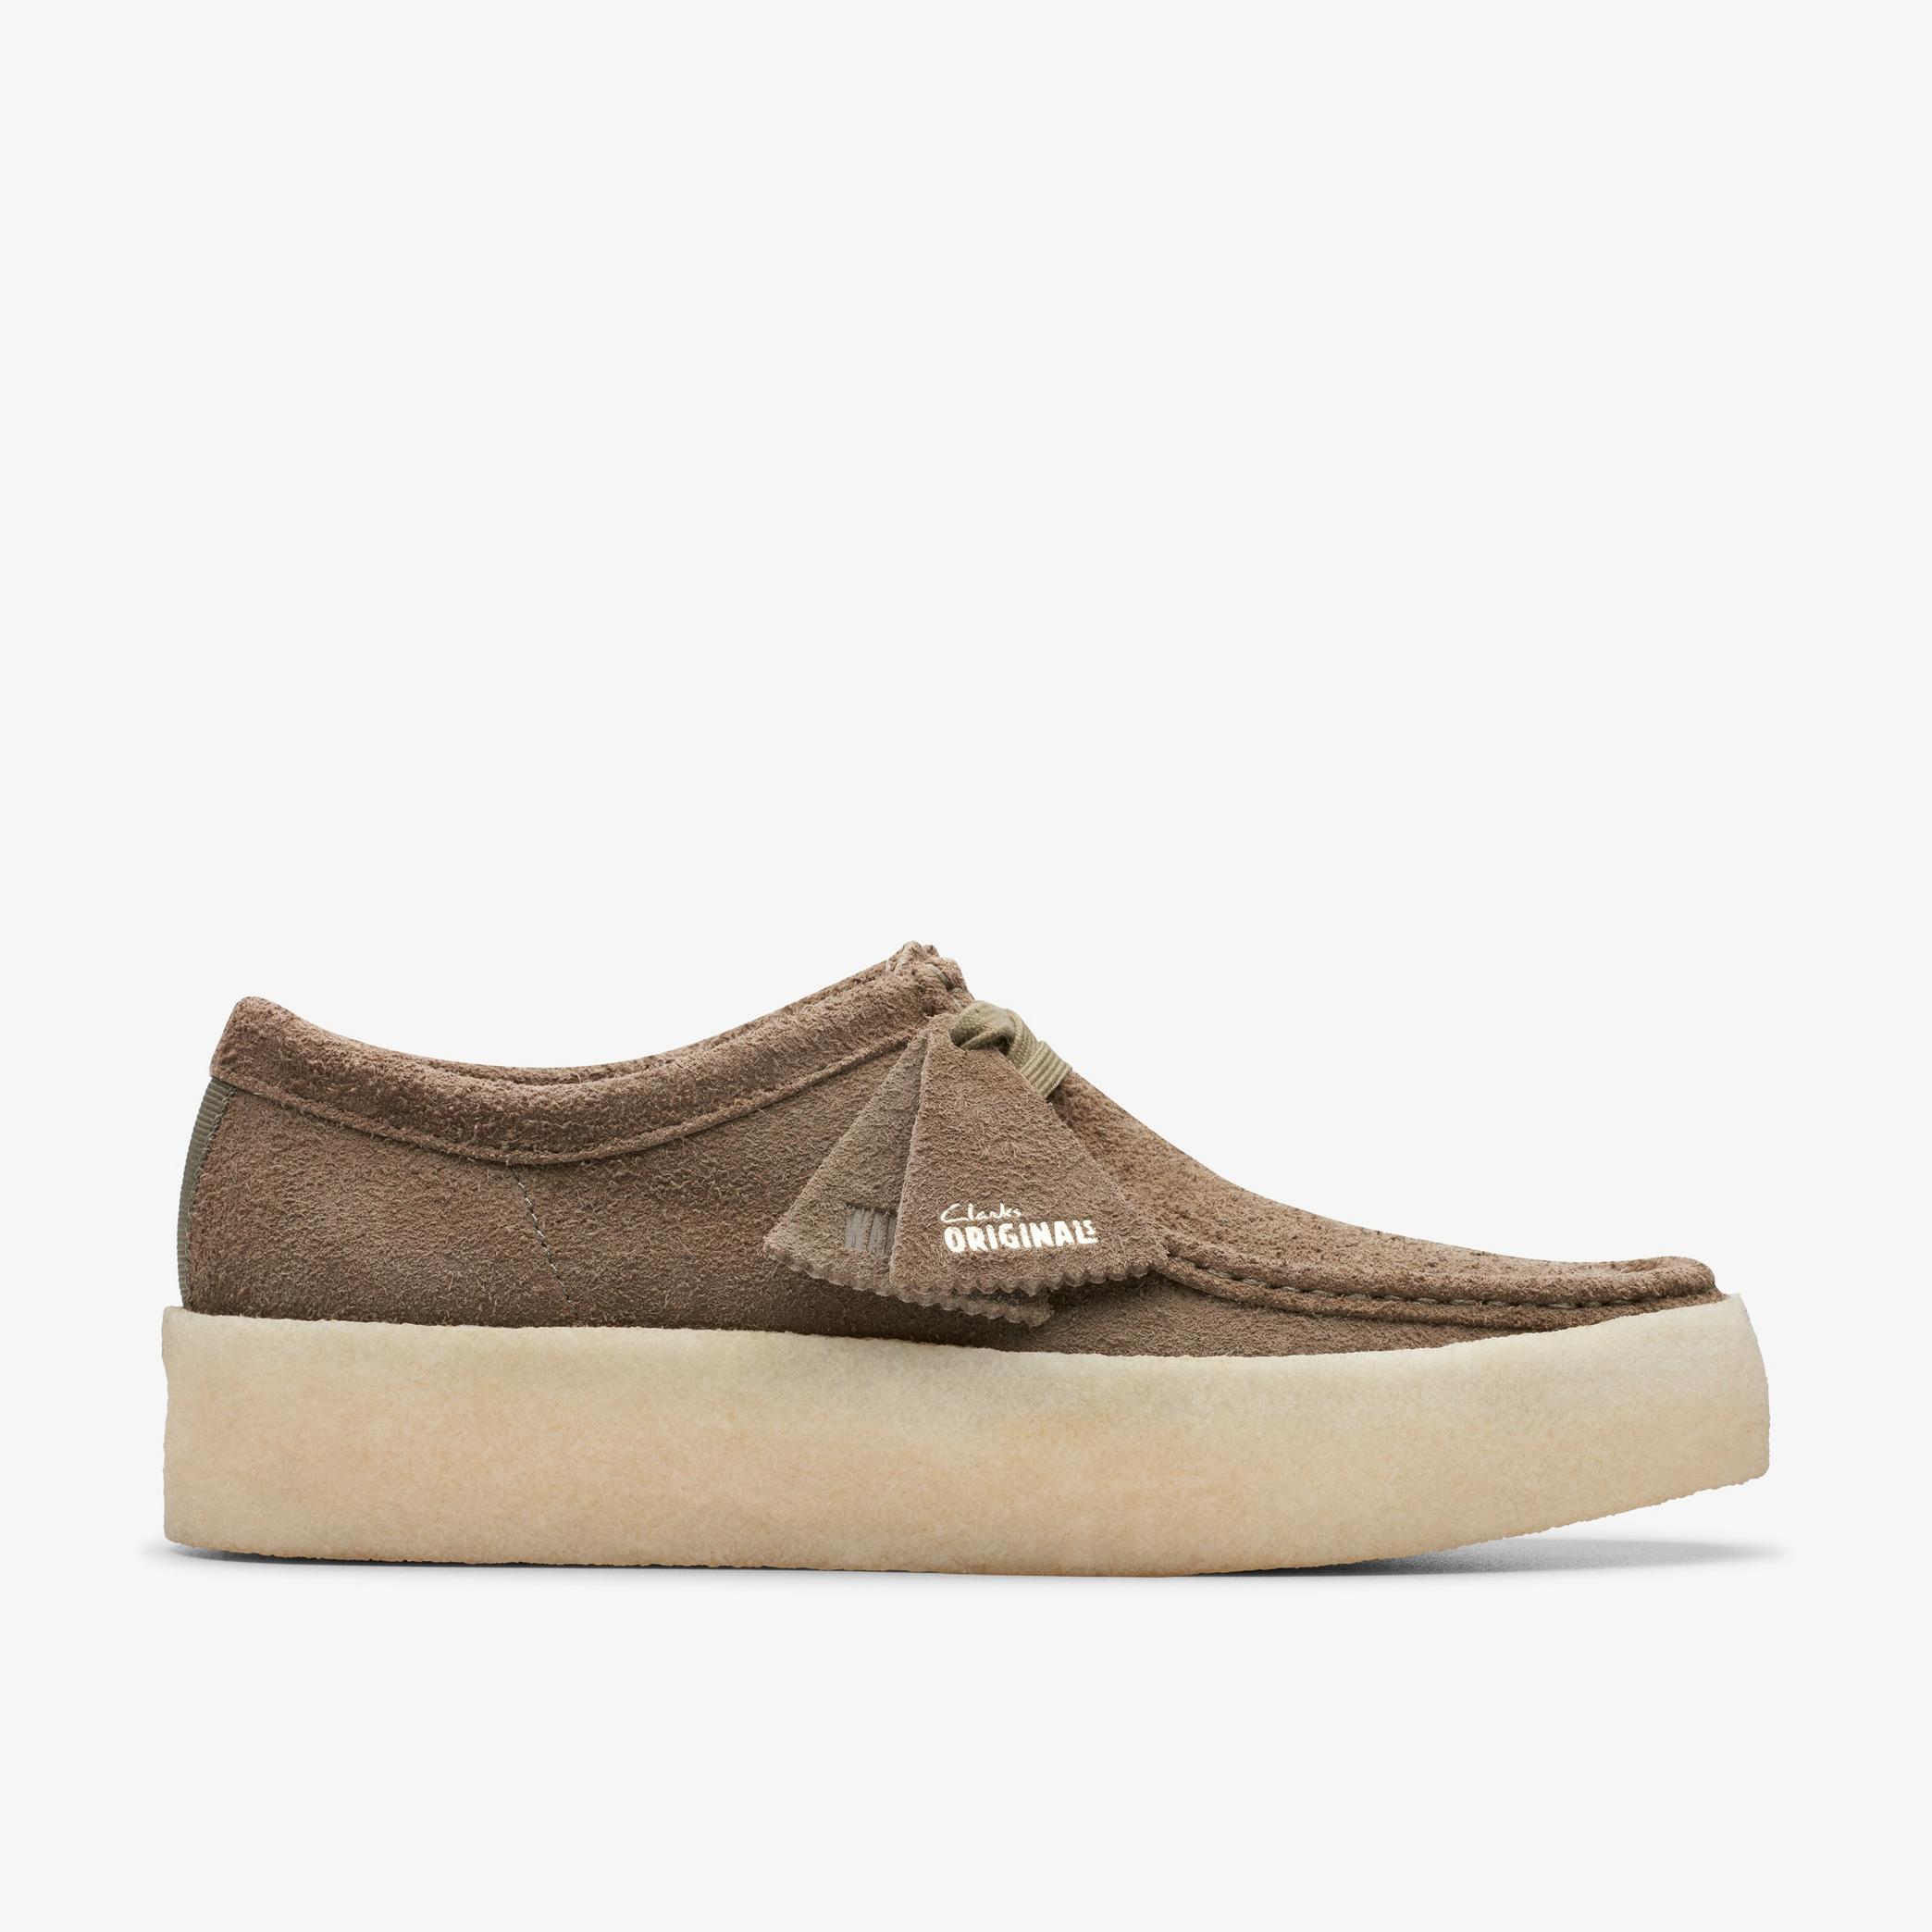 Wallabee Cup Pale Khaki Suede Wallabee, view 1 of 6